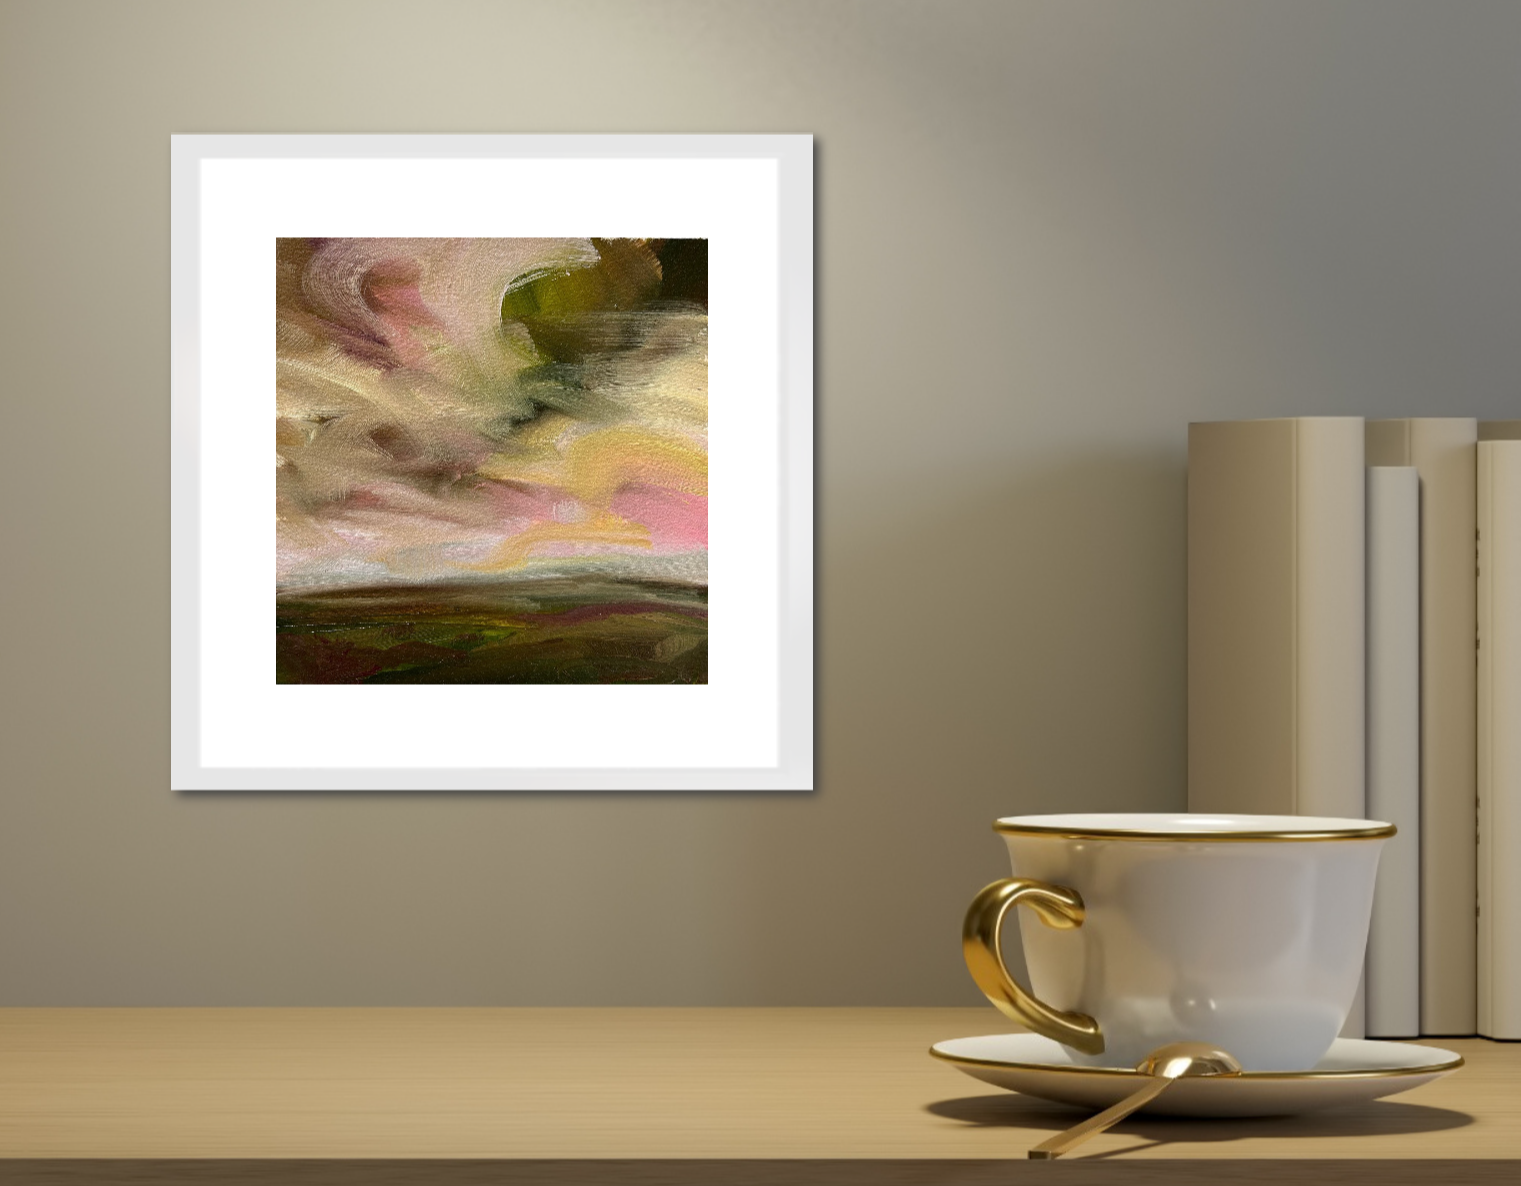 Pink & Green Original Oil On Paper Landscape Painting In Room Setting 3